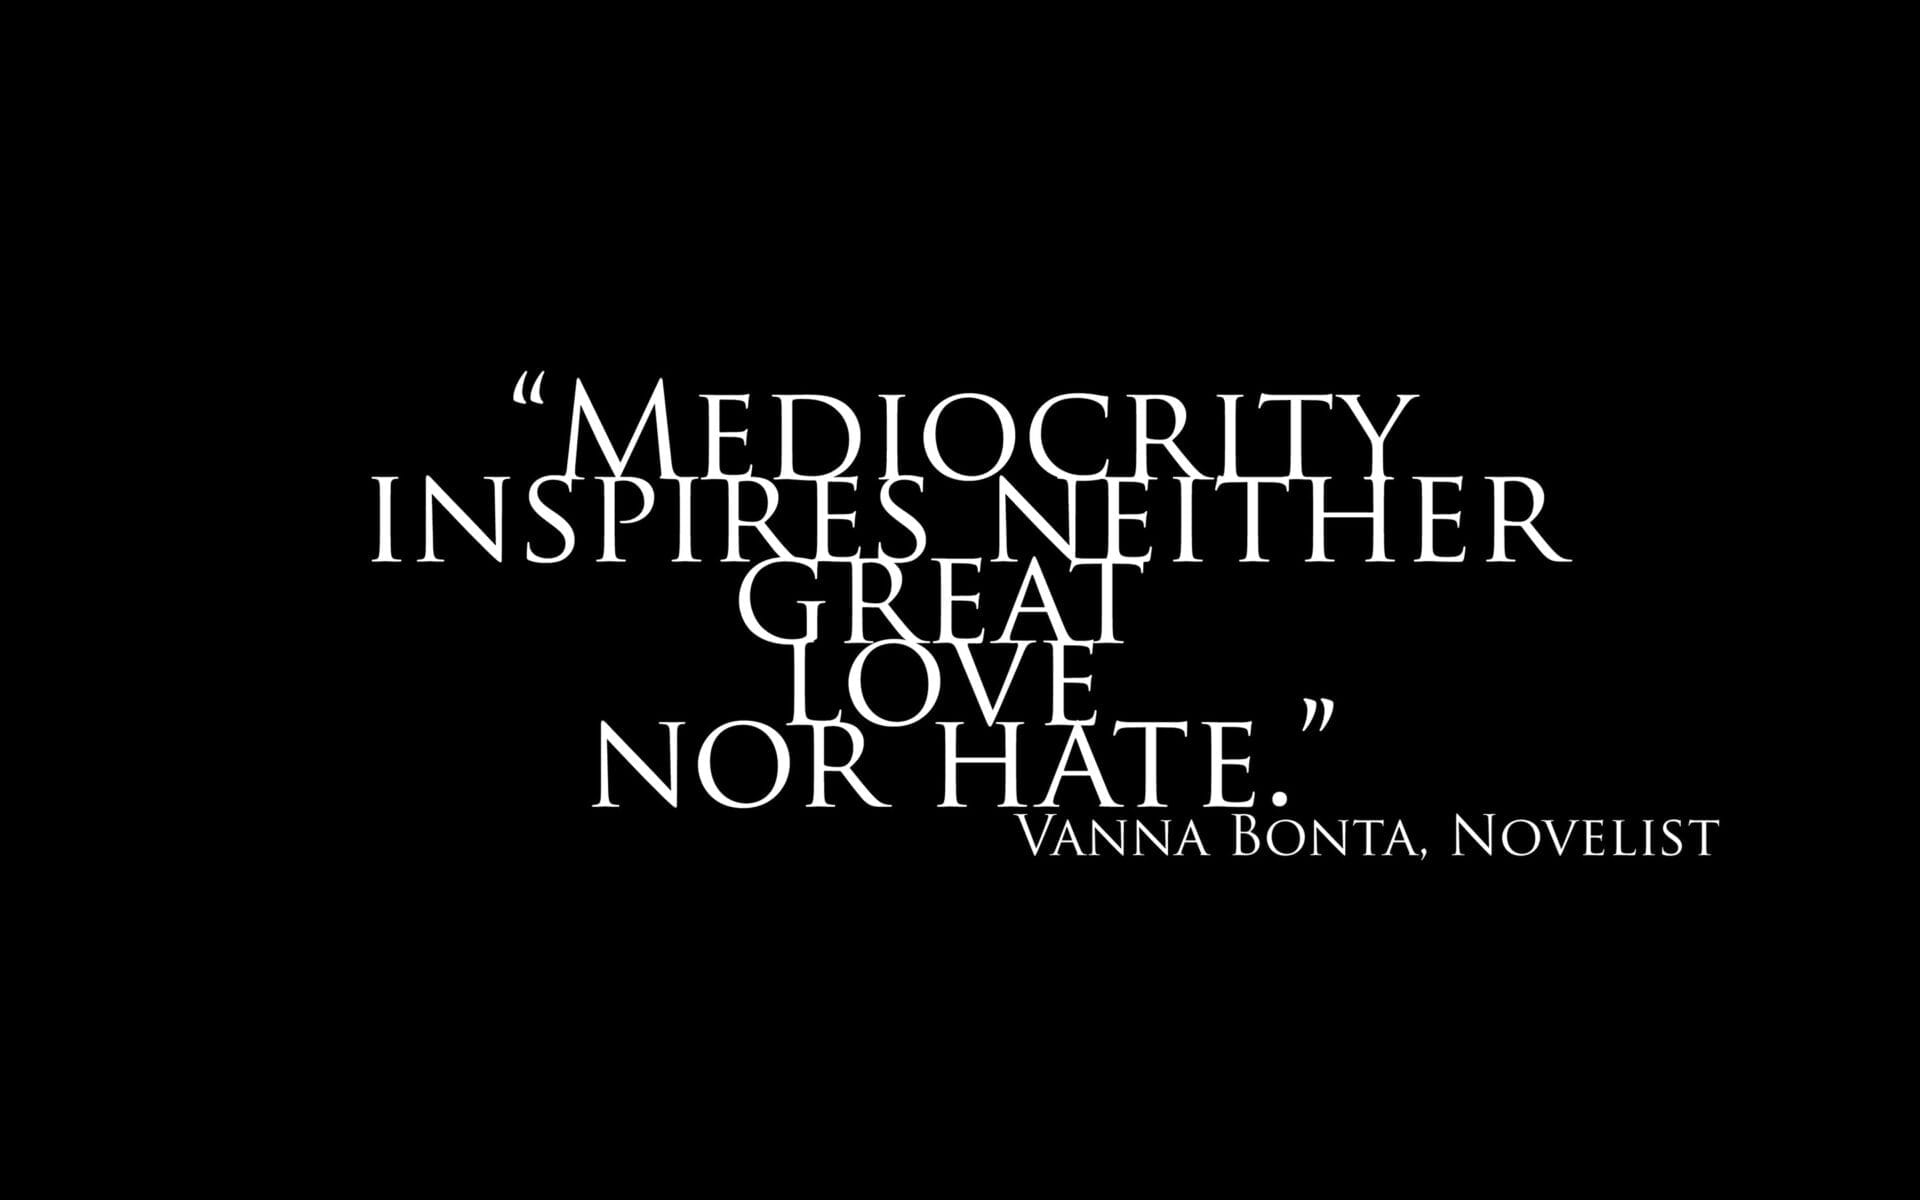 Mediocrity inspires neither great love nor hate.